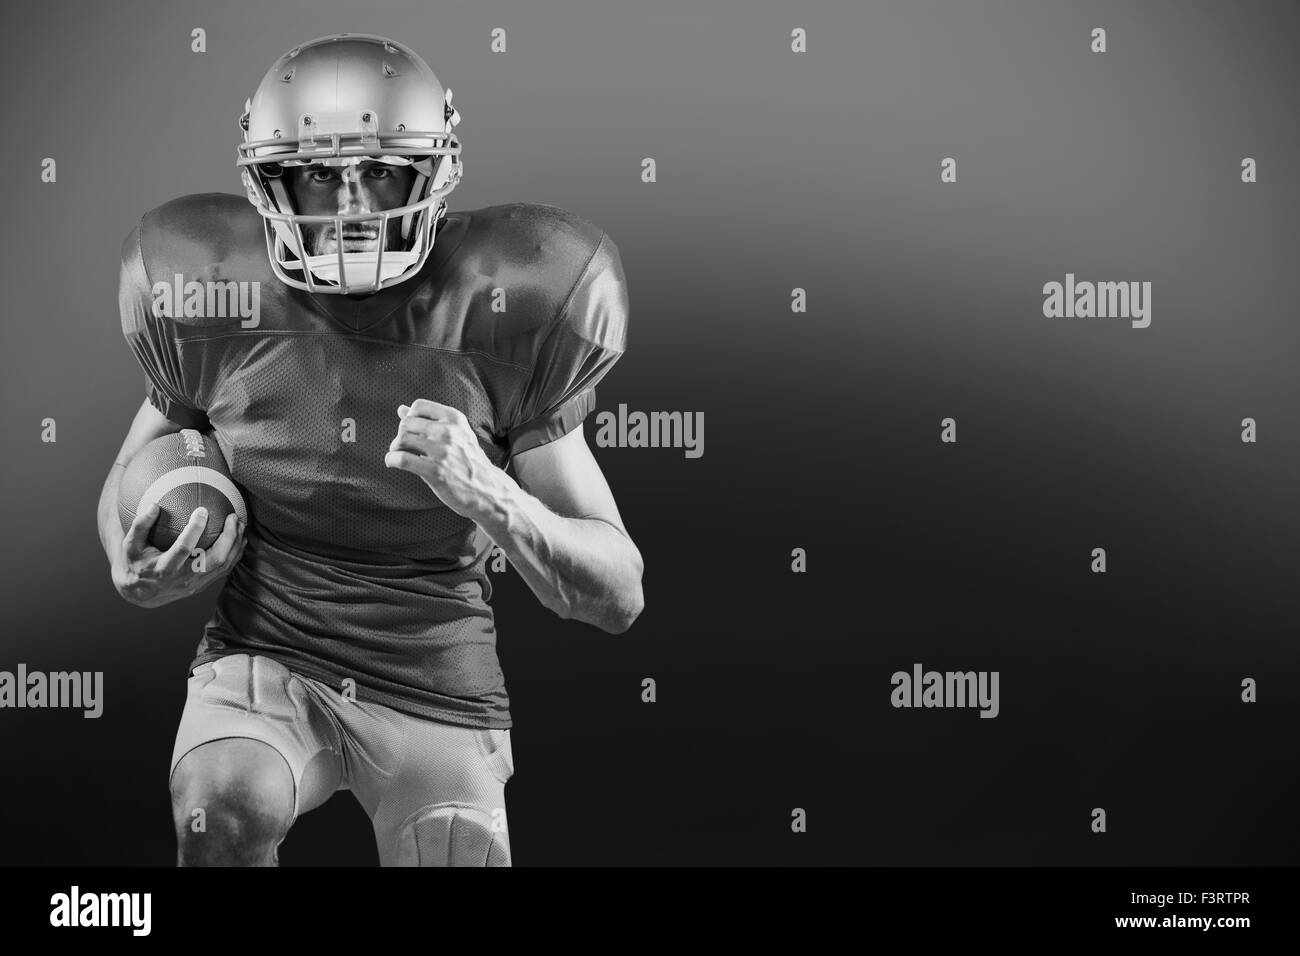 American football player in red Black and White Stock Photos & Images ...